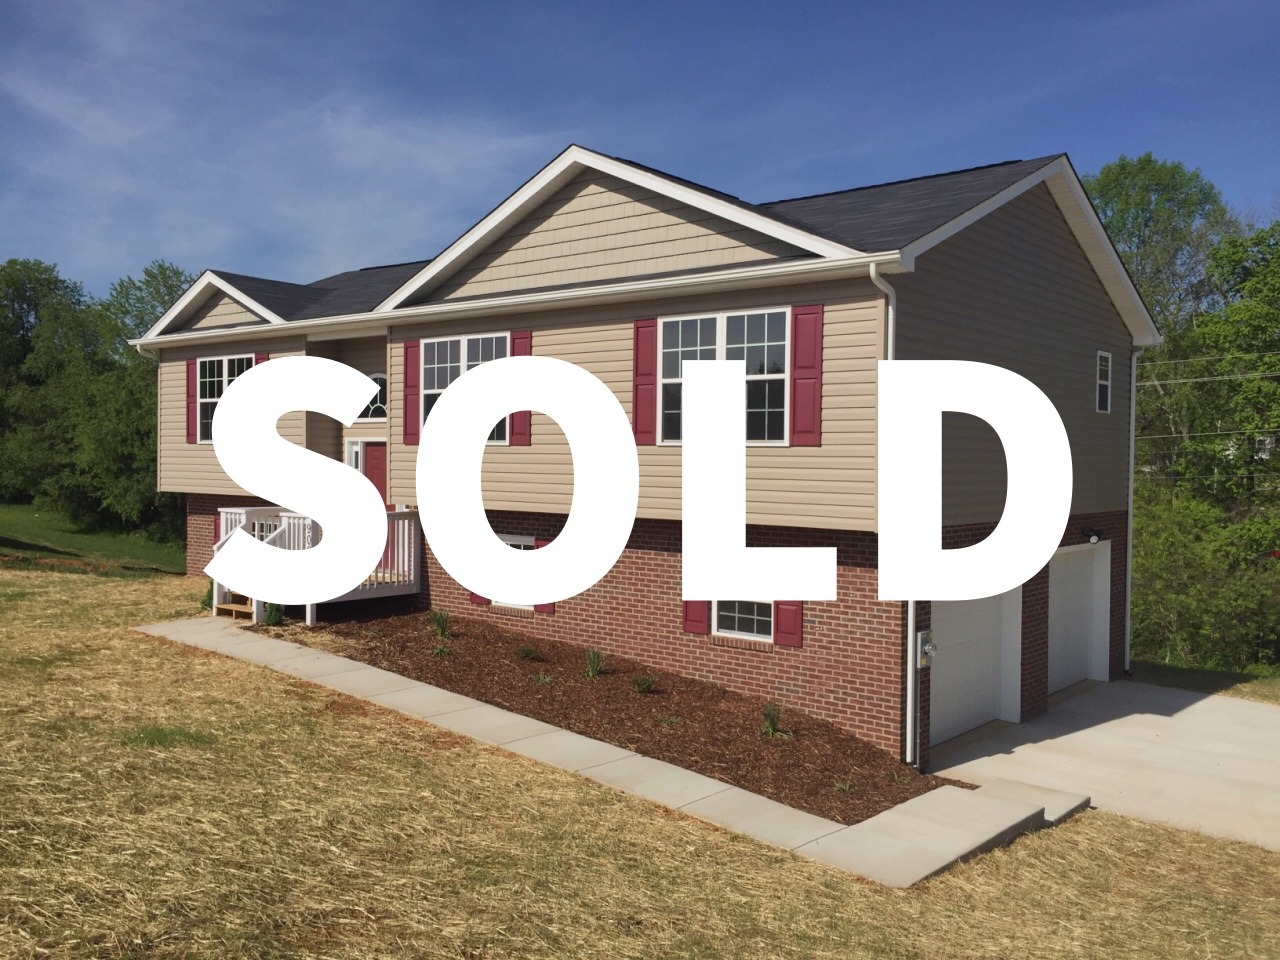 We just sold this house (908 Lona Lane, Bluff City, TN) for Moretz Construction. Closed on it yesterday.